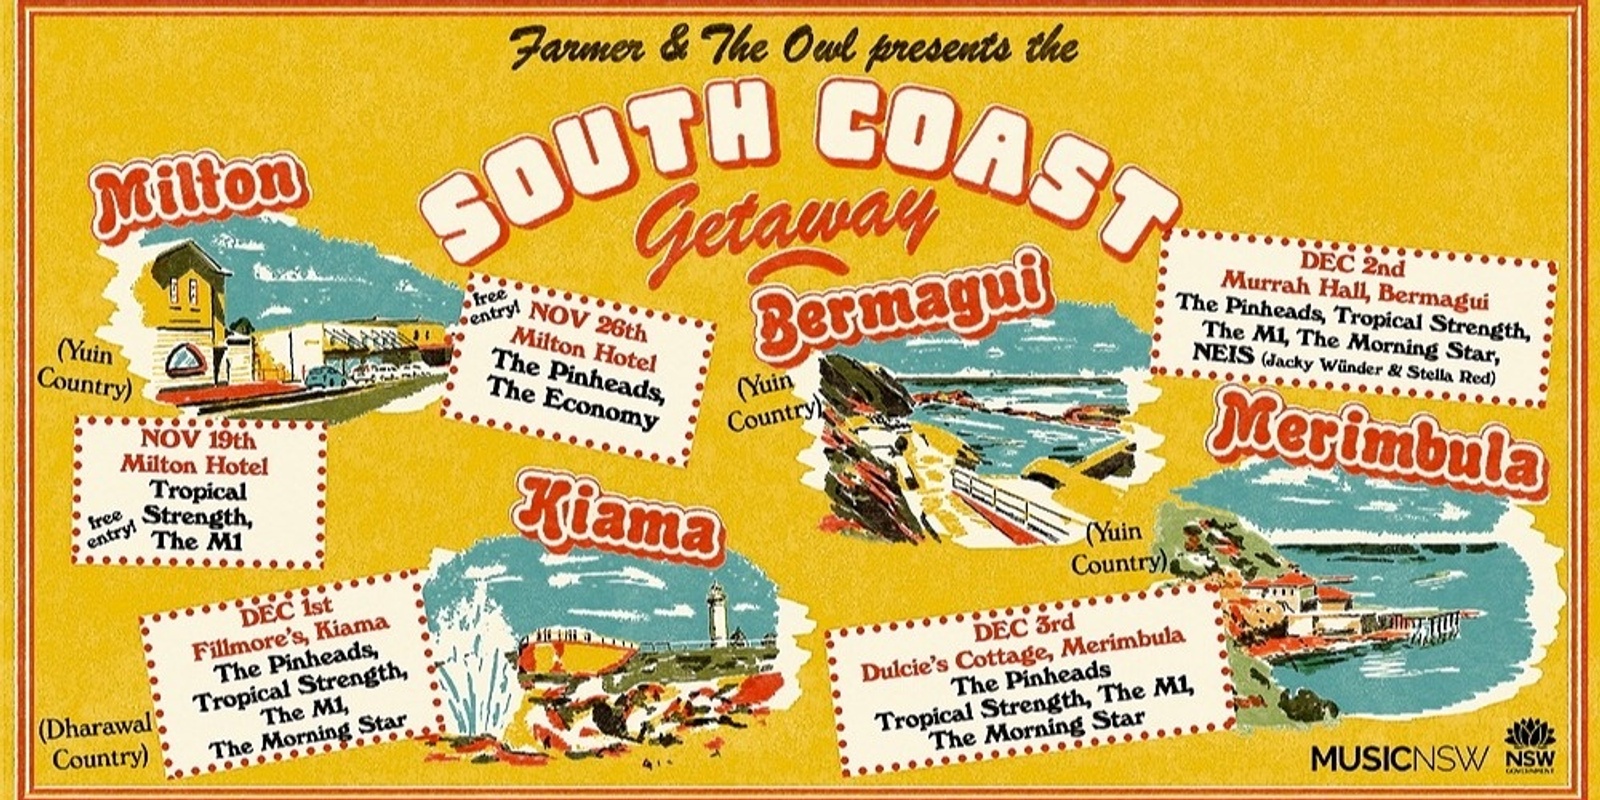 Banner image for South Coast Getaway Tour - FILLMORE'S KIAMA ft. The Pinheads, Tropical Strength, The M1, The Morning Star